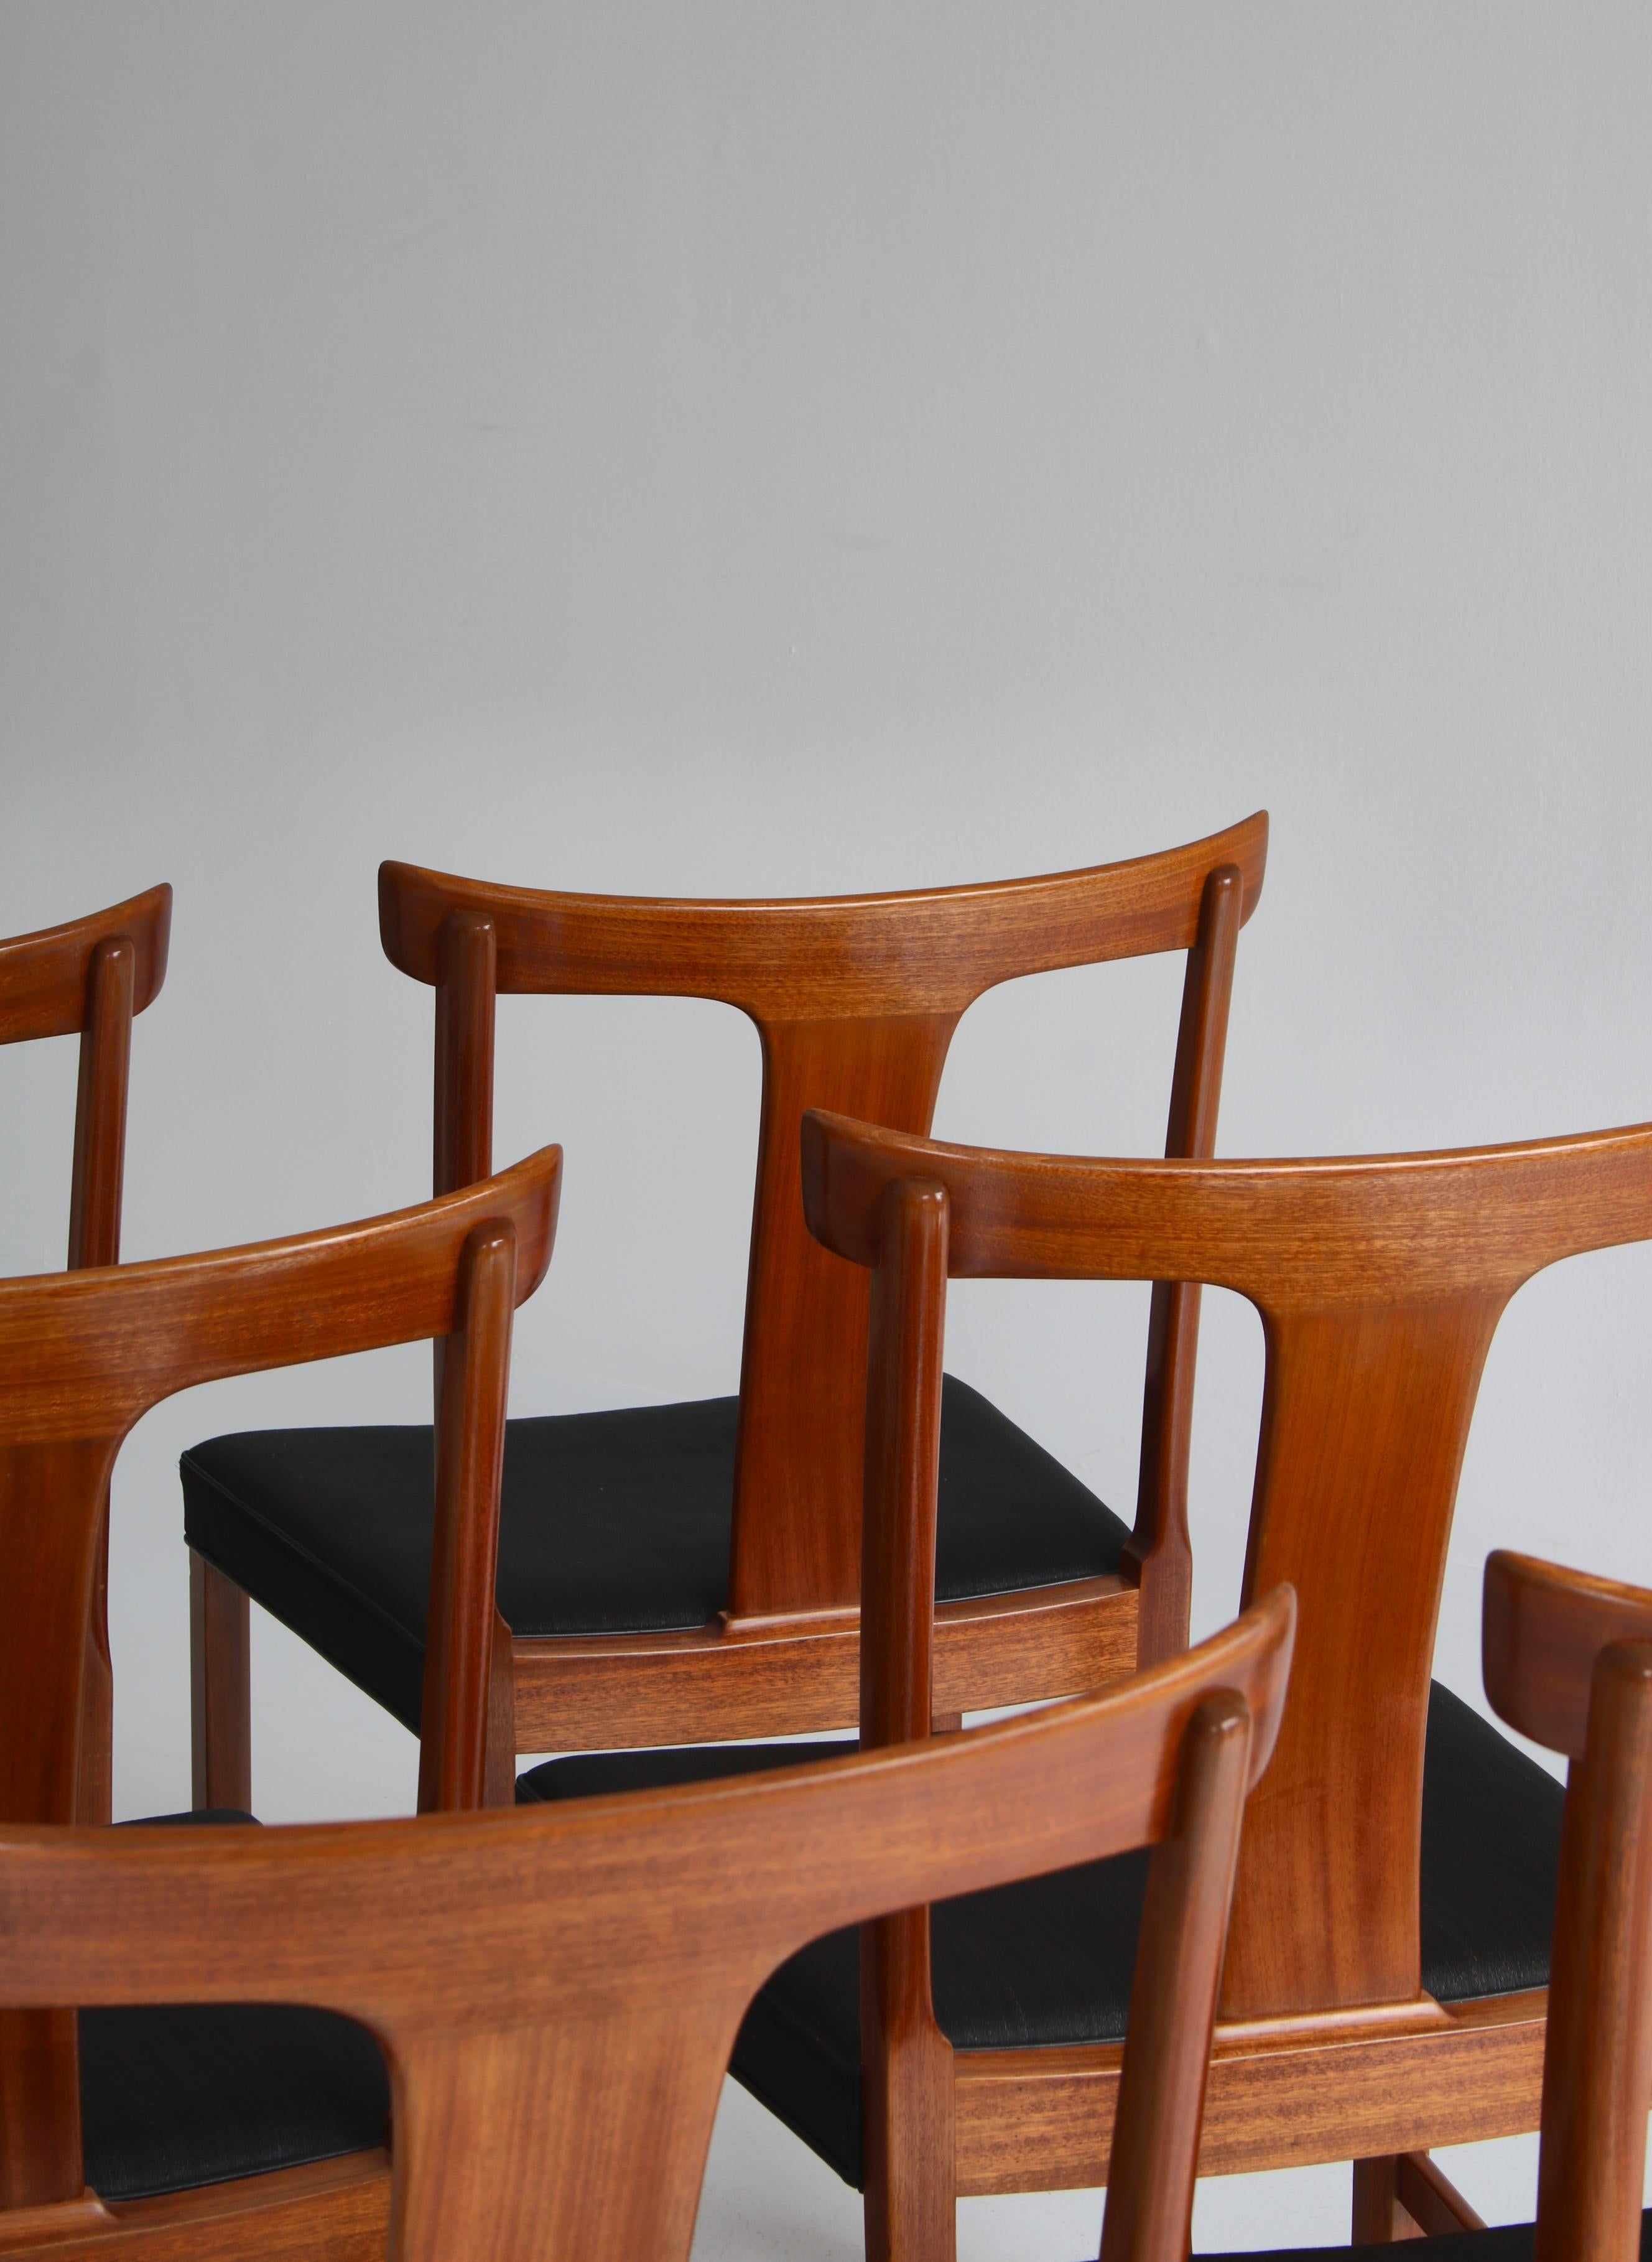 Ole Wanscher Dining Chairs in Mahogany and Horsehair Made by A.J. Iversen, 1960s For Sale 7